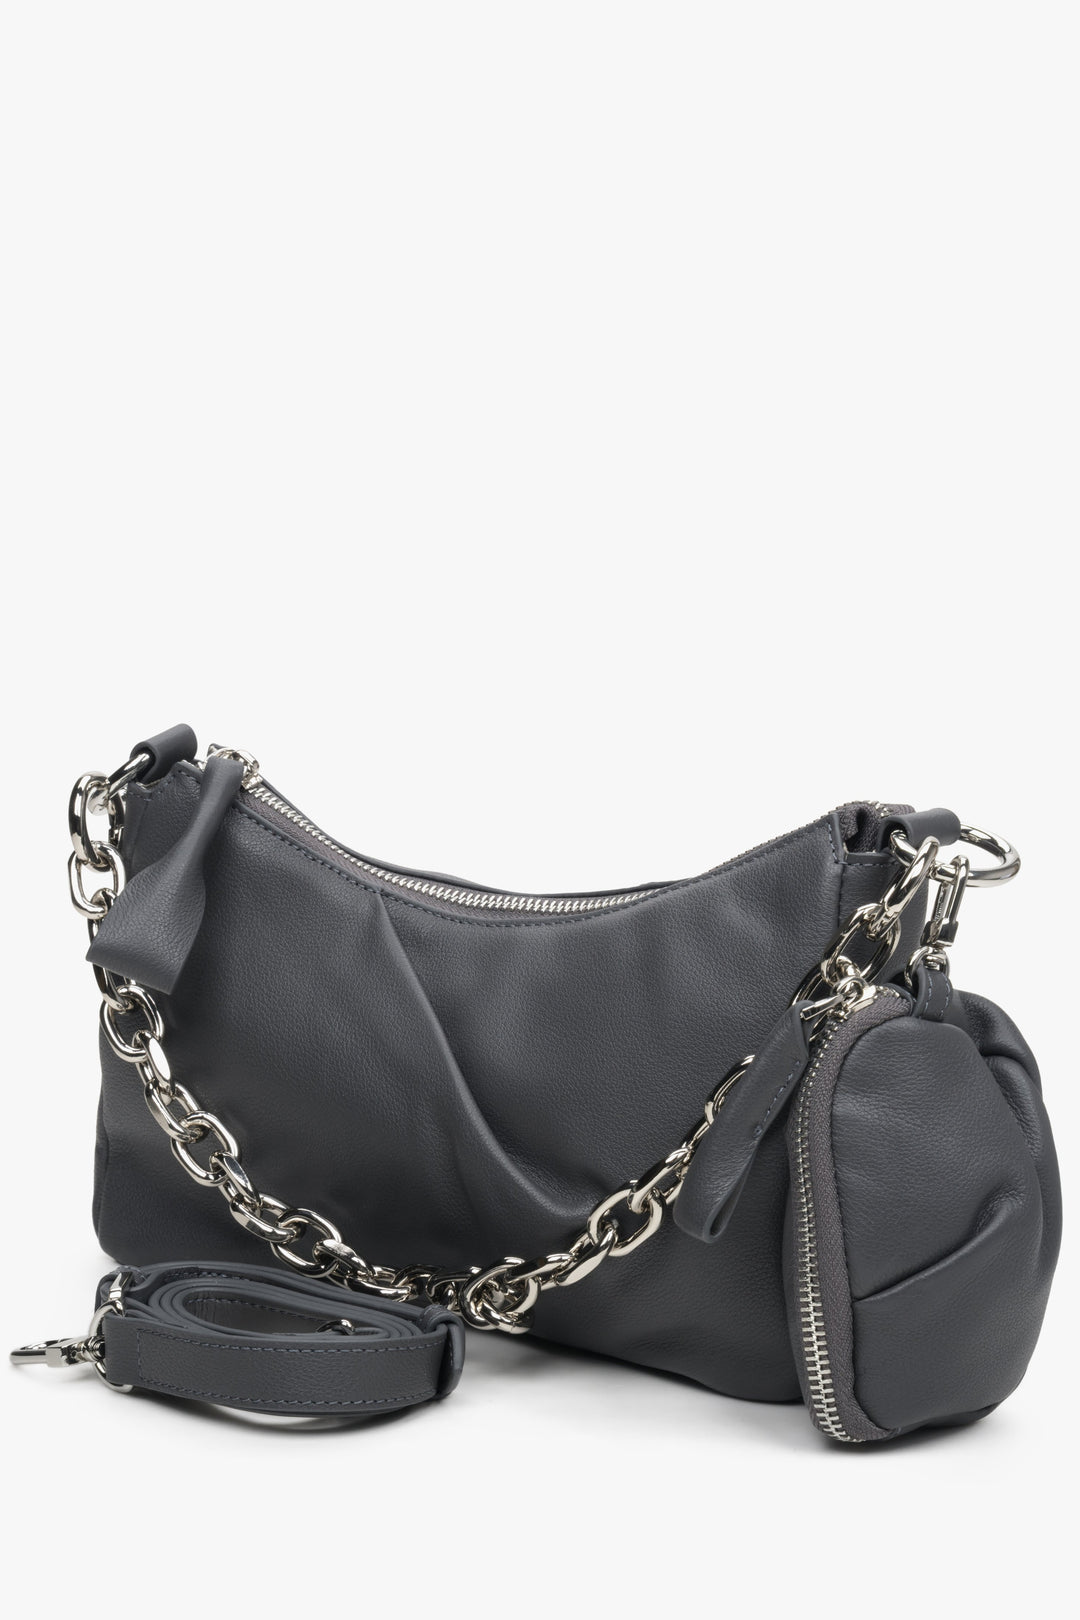 Estro's women's grey leather bag with an elegant chain strap.